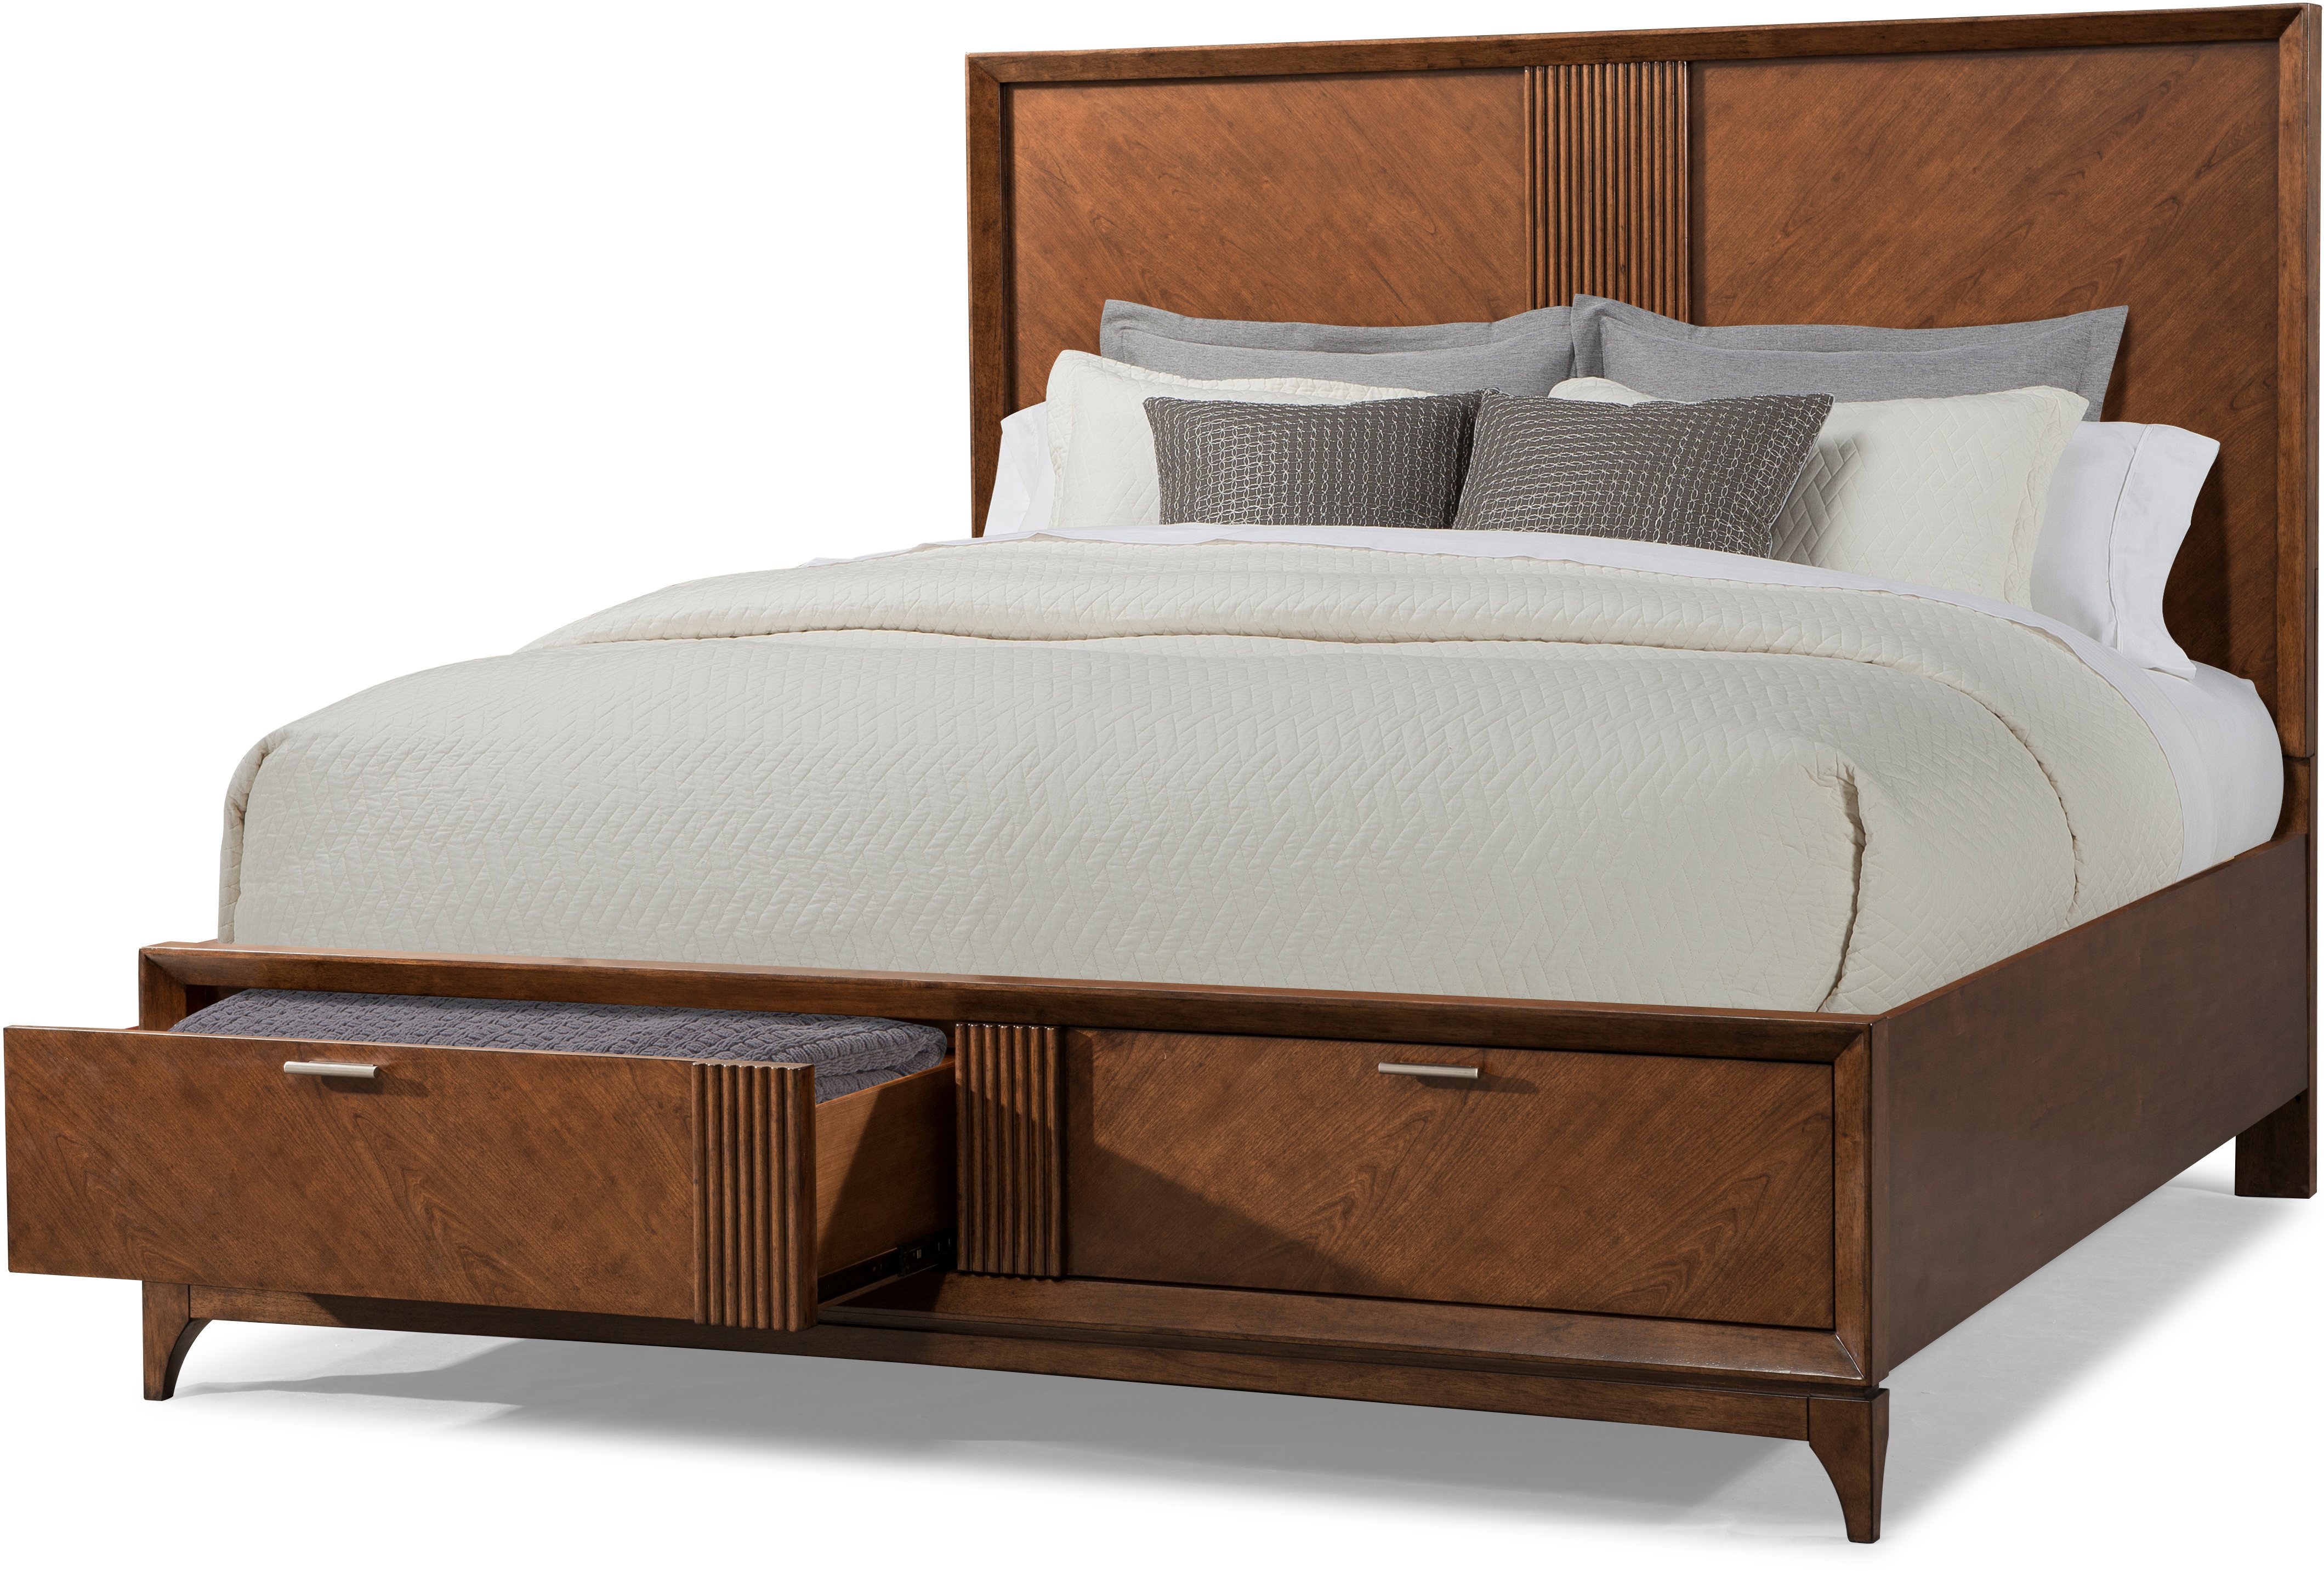 Brown Cherry Mid Century Modern King Storage Bed   Simply Urban rcwilley image1